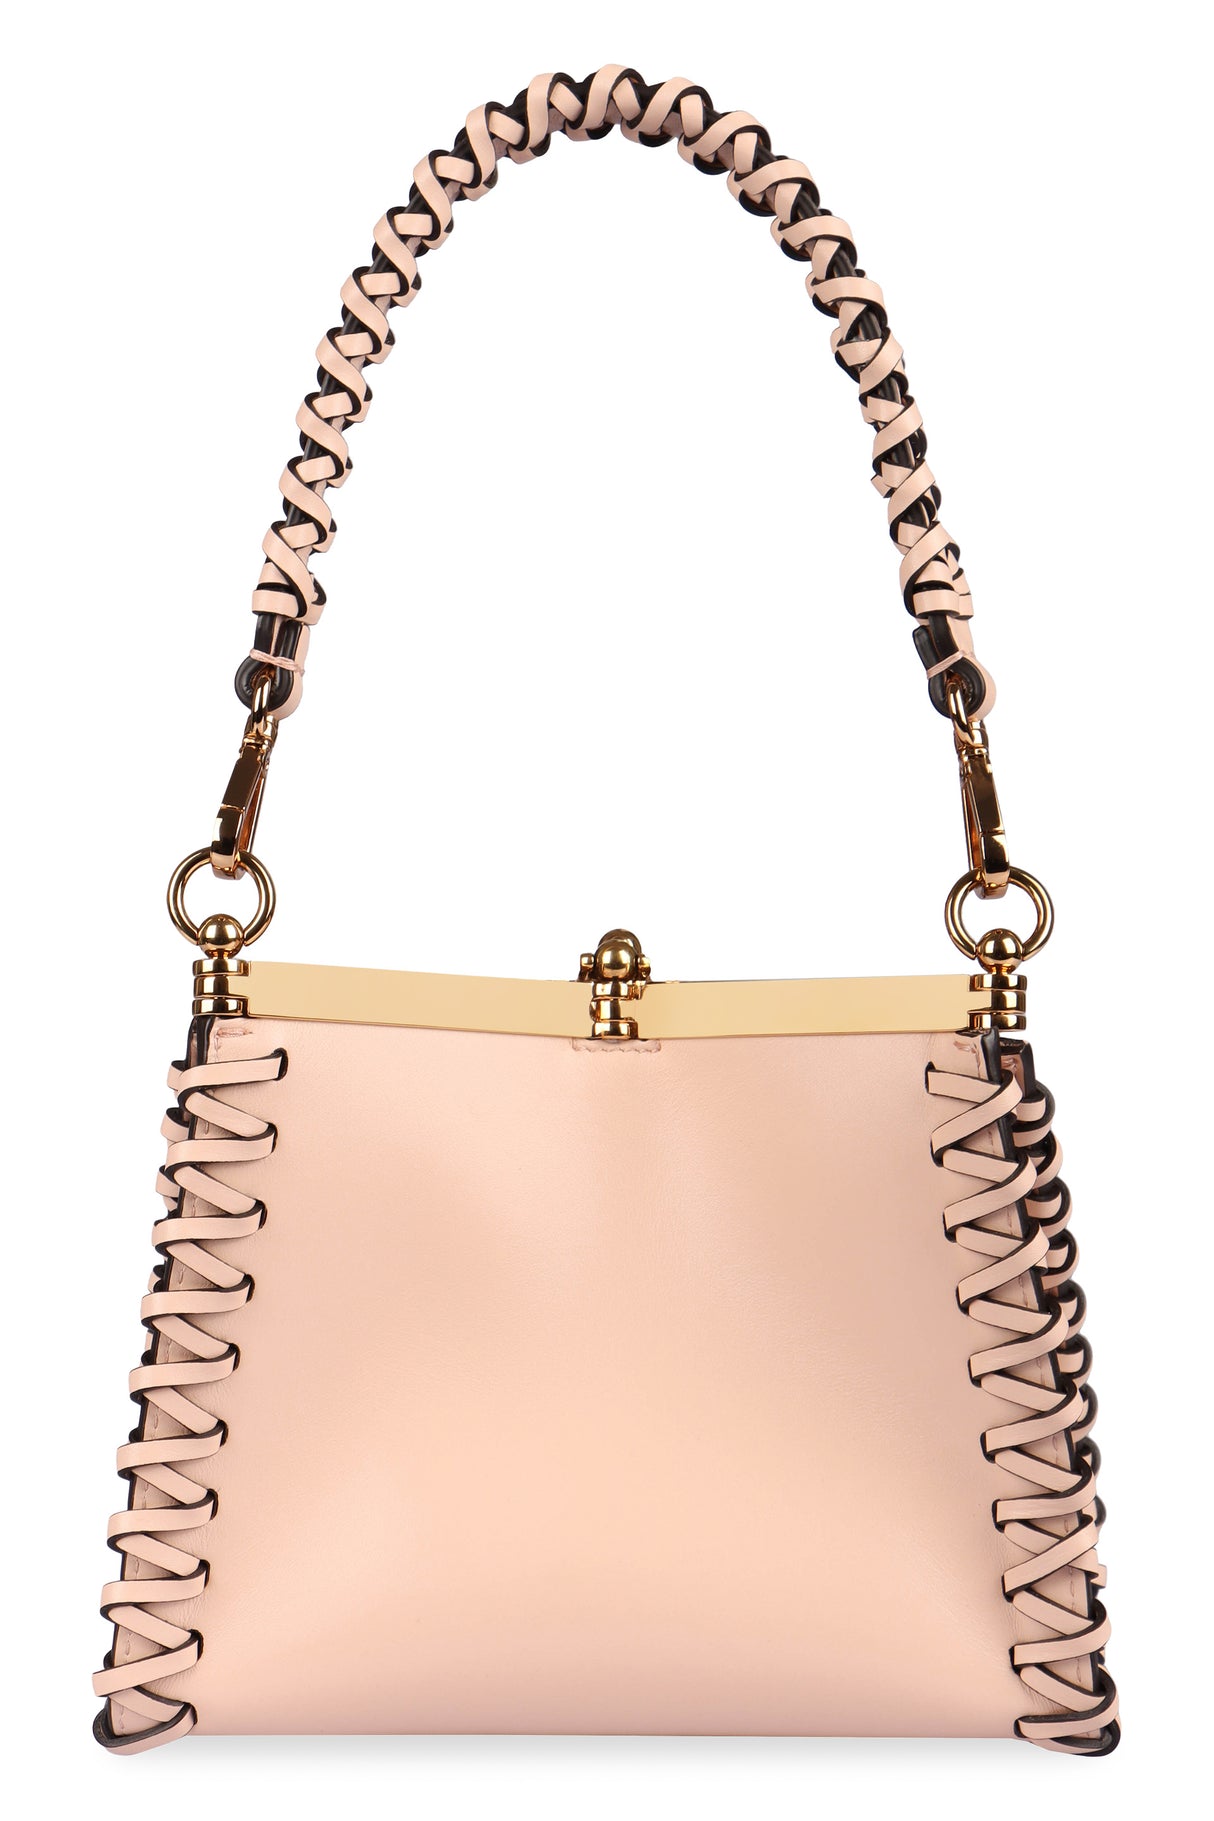 ETRO Mini Pink Calfskin Leather Shoulder Bag with Gold-Tone Accents and Suede Lining, 21x16x9 cm